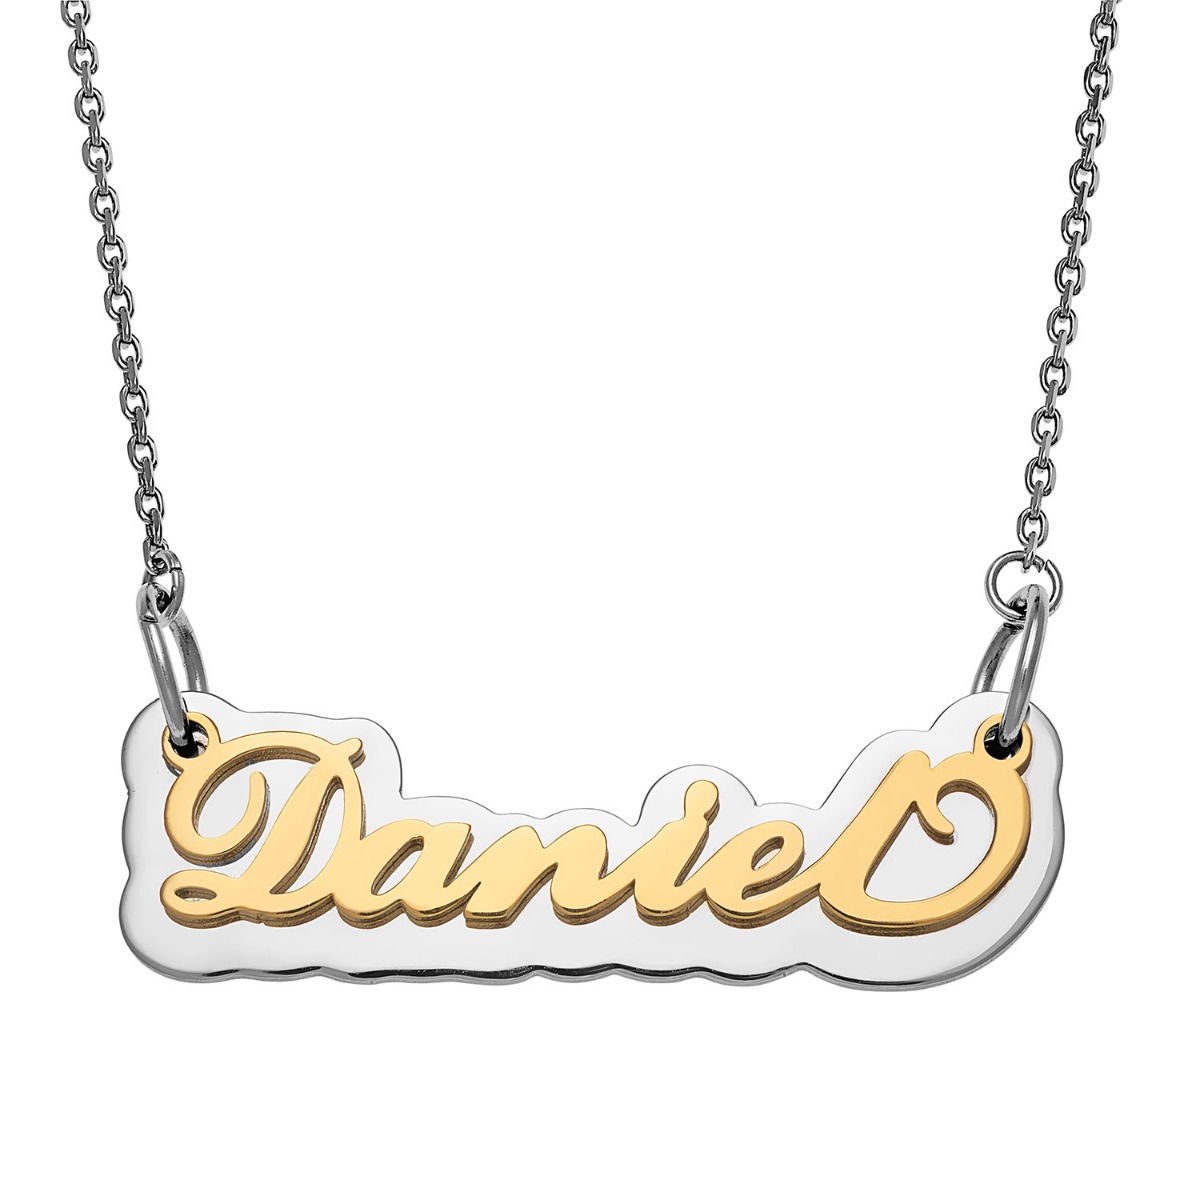 Gold Stainless Steel Name on Mirrored Reflective Plaque Necklace